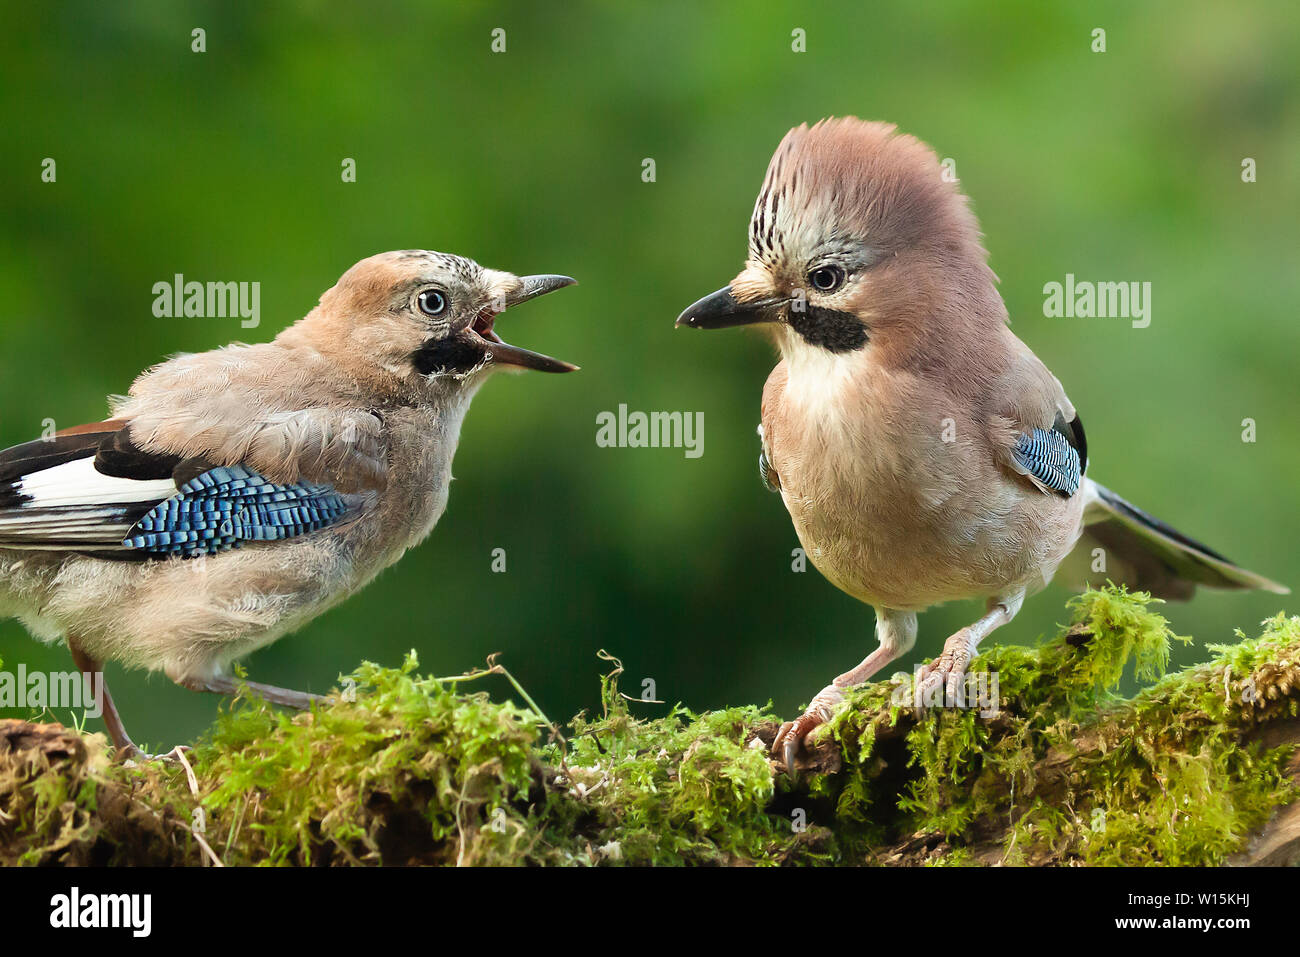 Jay bird parent with young chick wanting food, close up on a moss covered log in a woodland scene. Stock Photo